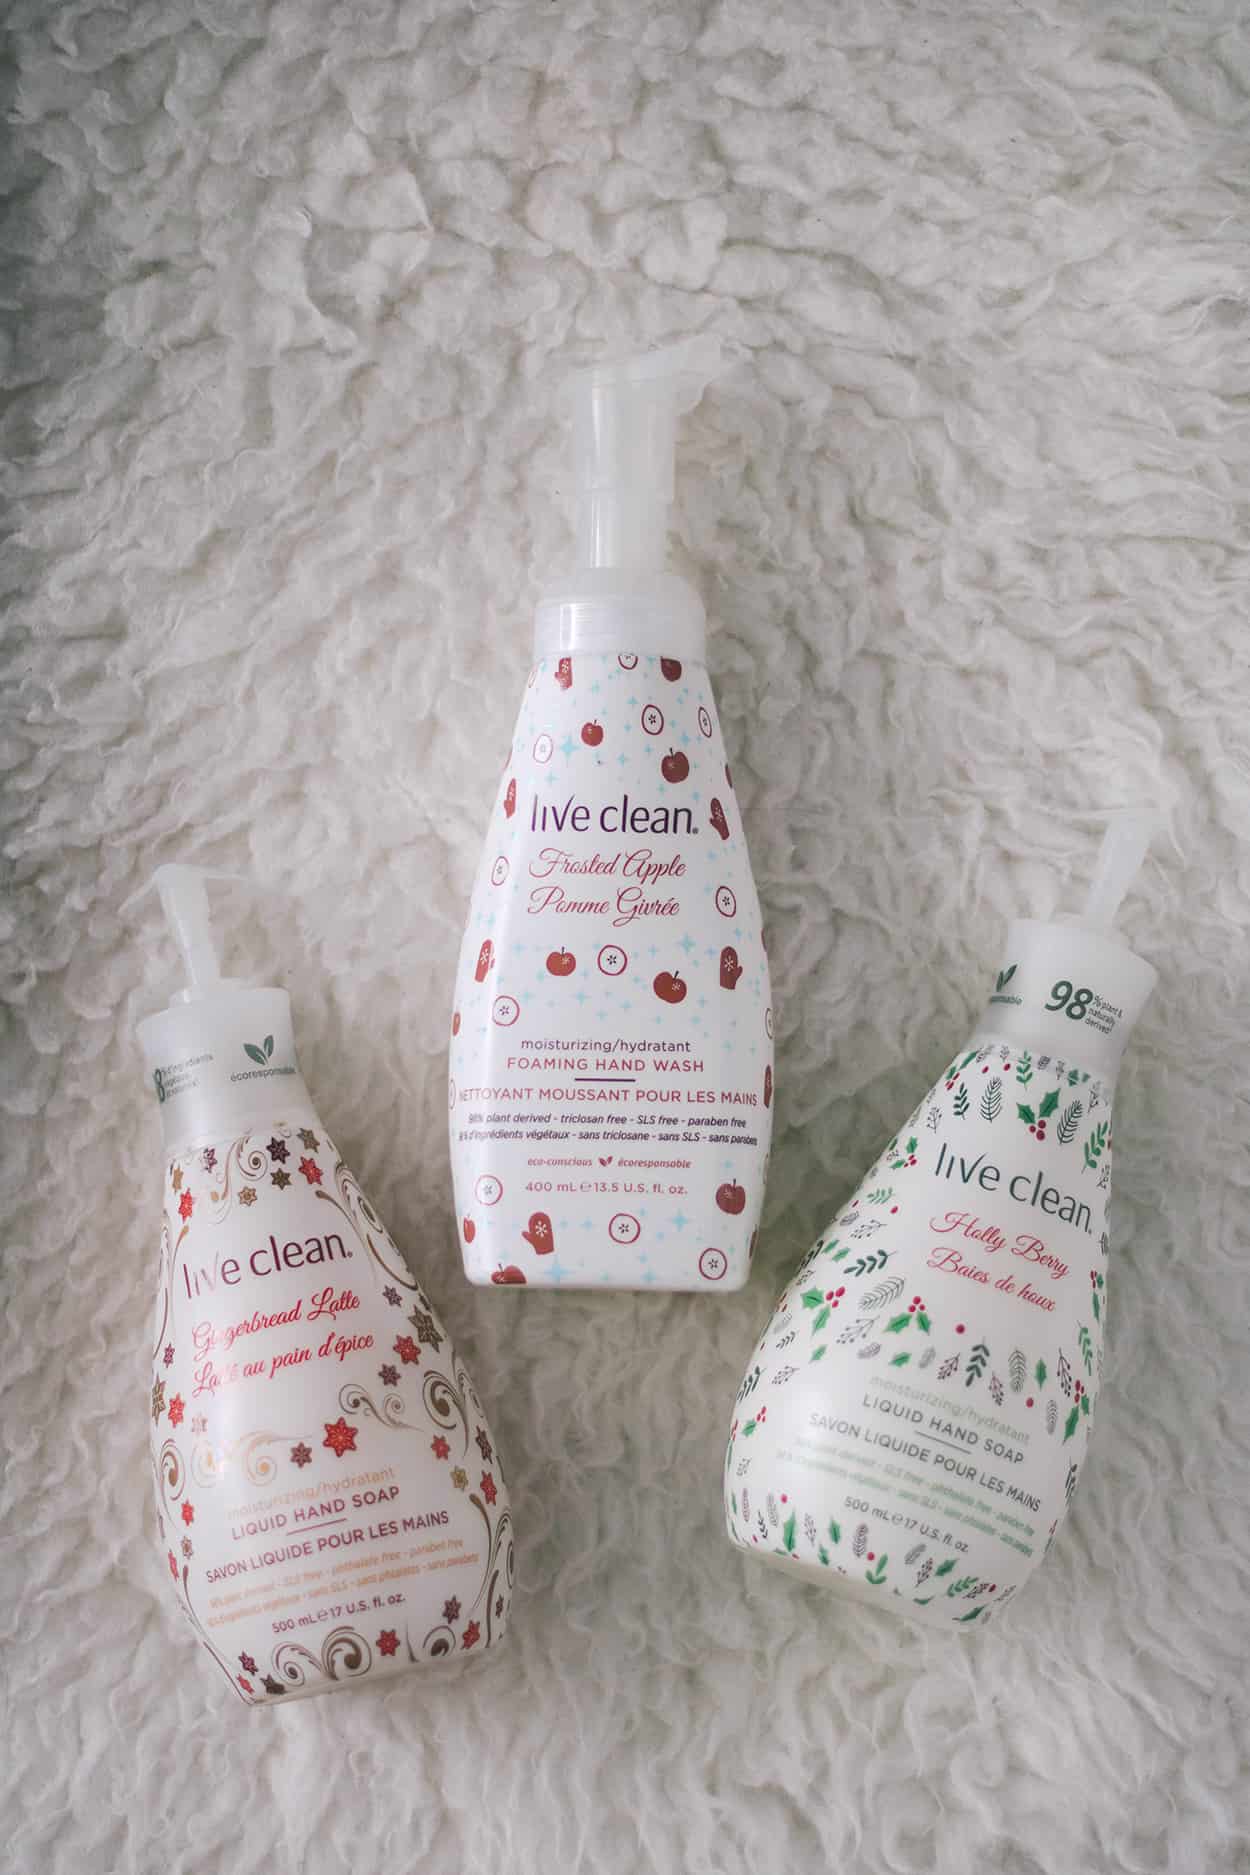 Live Clean Canada holiday-scented hand soaps